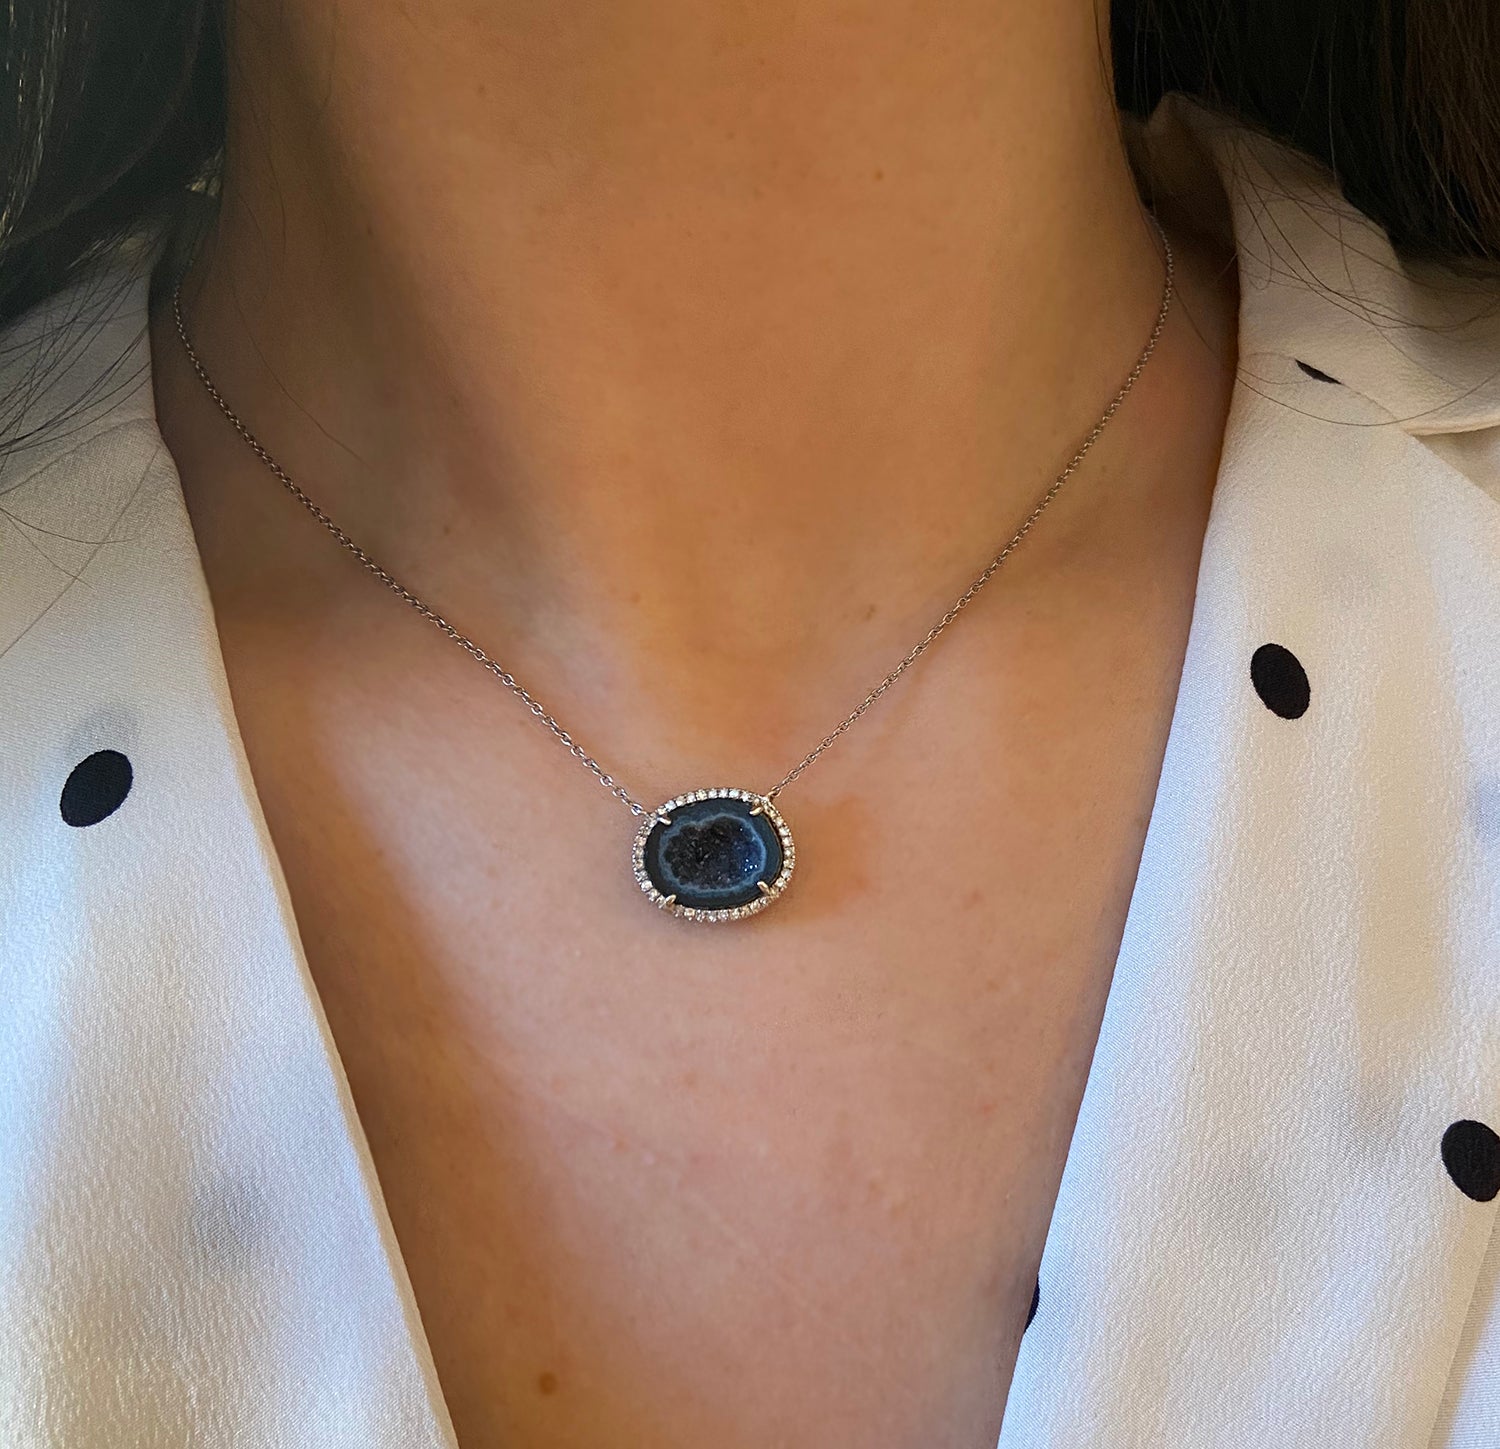 Black Baby Geode Necklace With Diamonds in White Gold Pendant